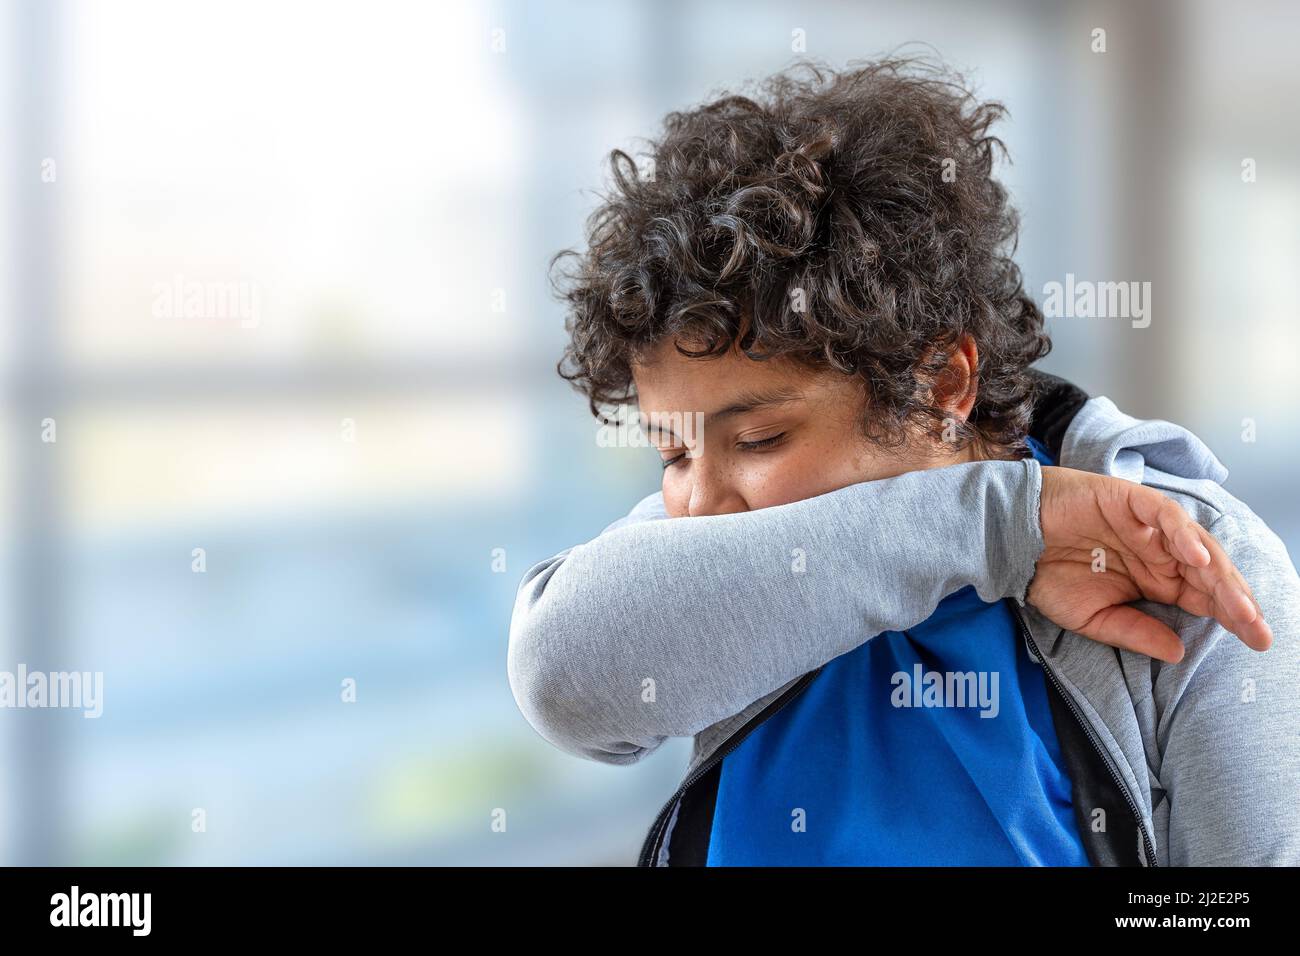 Yong boy teenager sneezing into his elbow.to avoid infecting others Stock Photo